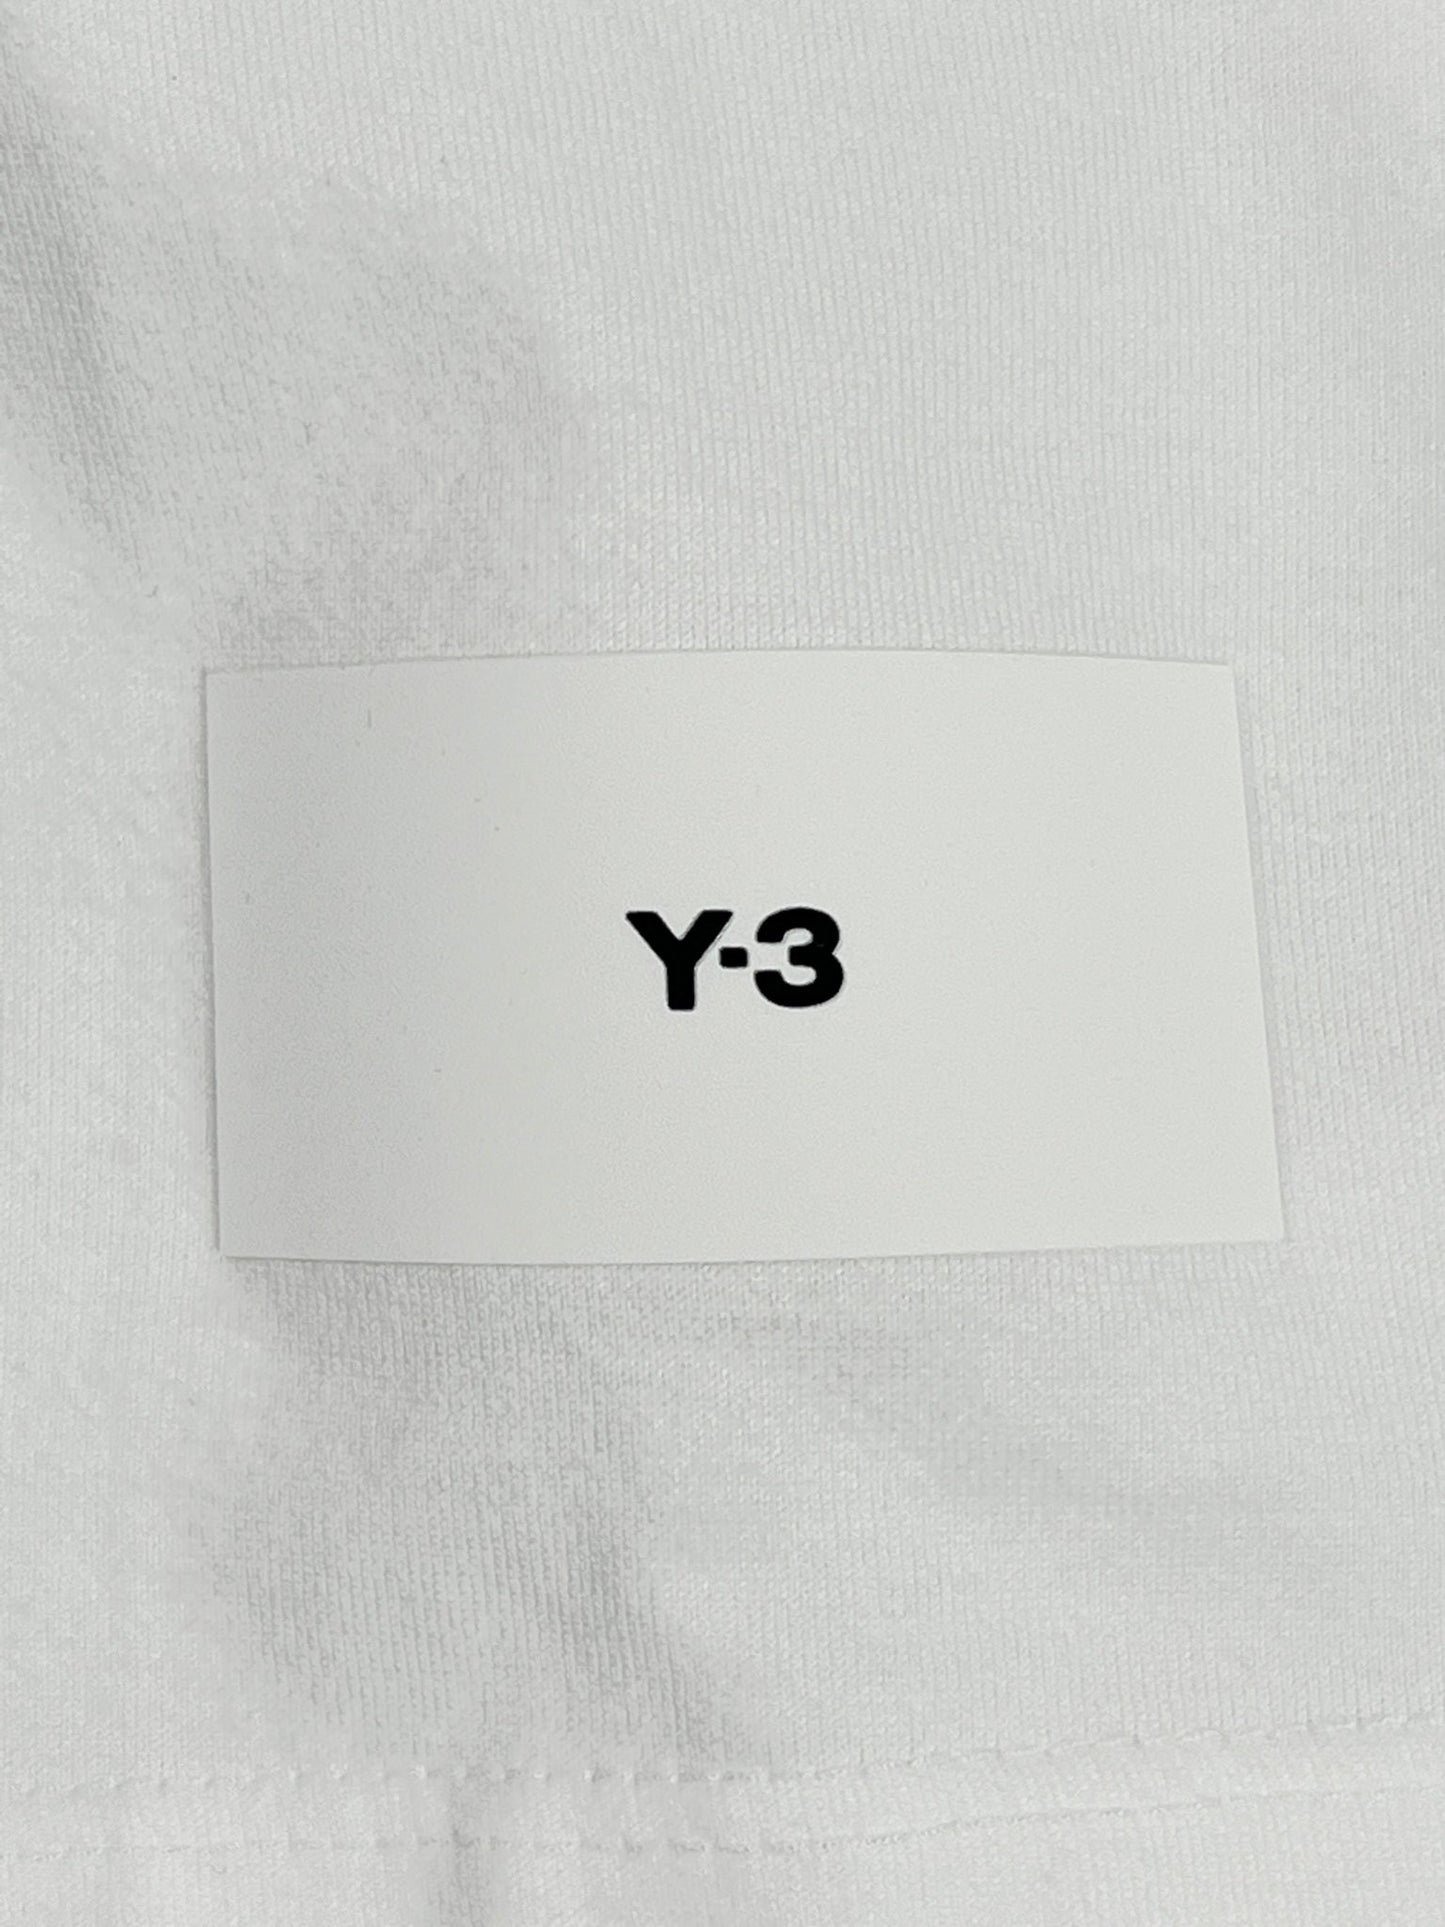 A white Y-3 IB4787 RELAXED SS TEE CORE WHITE t-shirt featuring the ADIDAS x Y-3 logo detail on it.